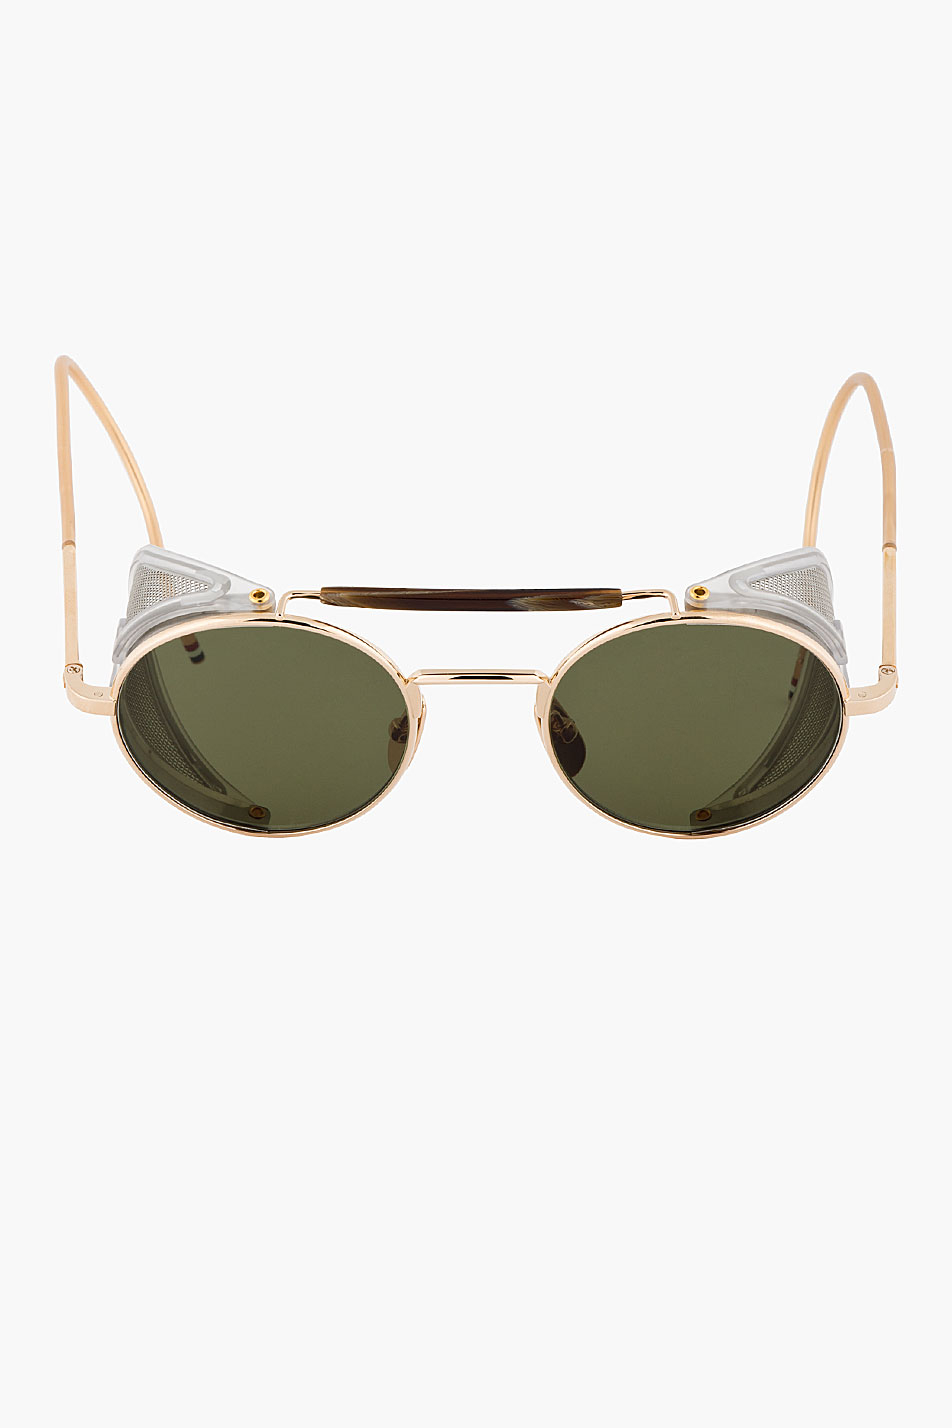 Thom Browne Gold Side Shield Round Sunglasses in Metallic for Men | Lyst